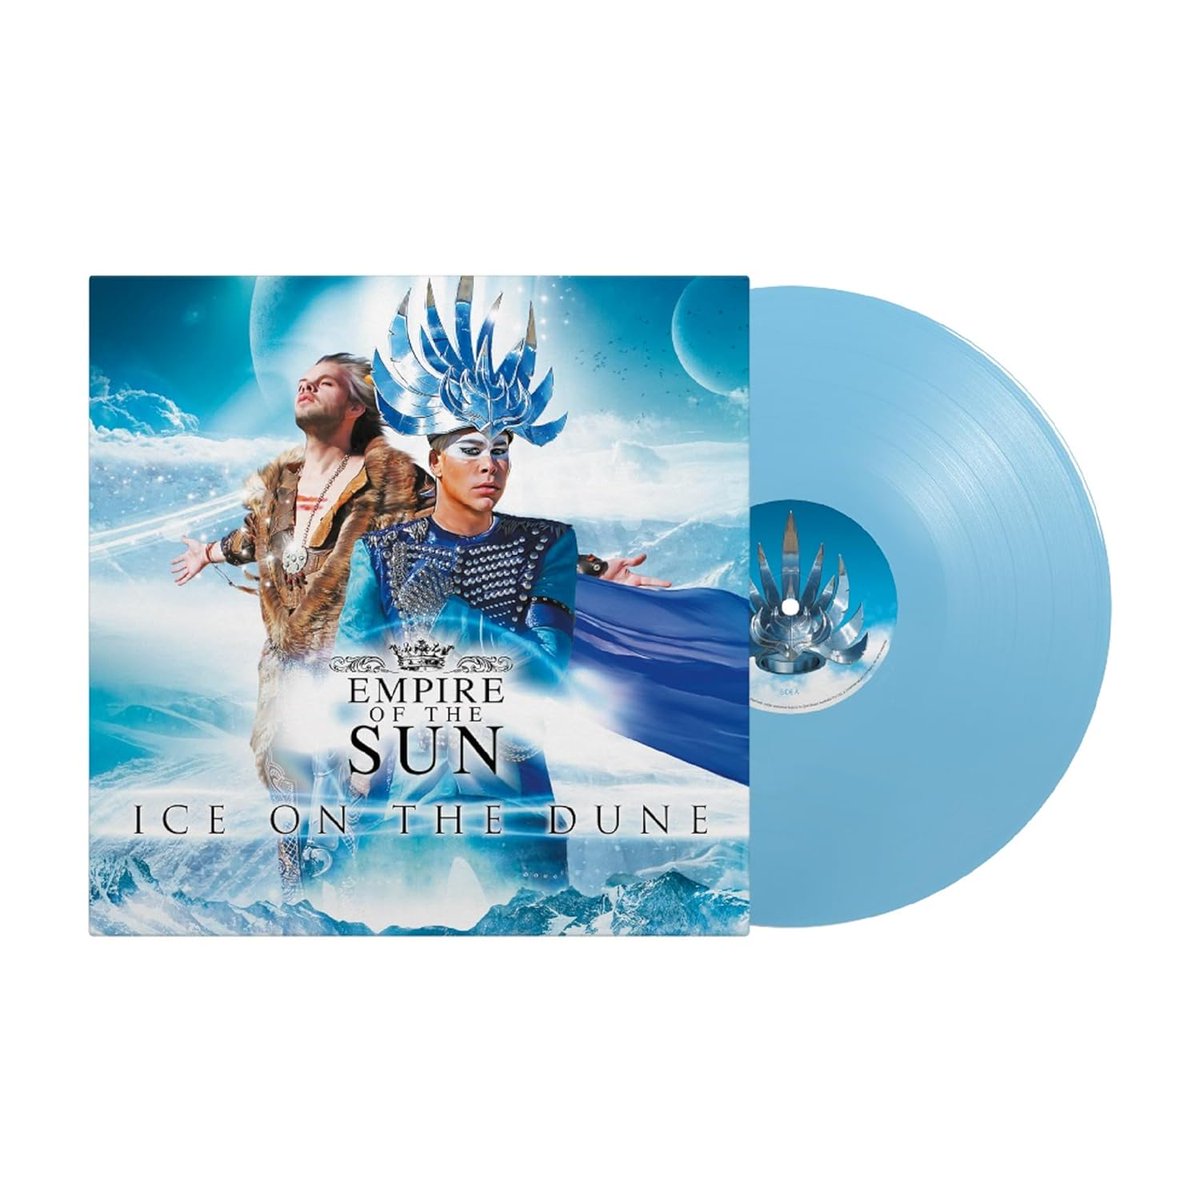 Empire of the Sun - Ice On The Dune - Limited Opaque Blue $39.99 [Pre-order] amzn.to/3wK6TPo